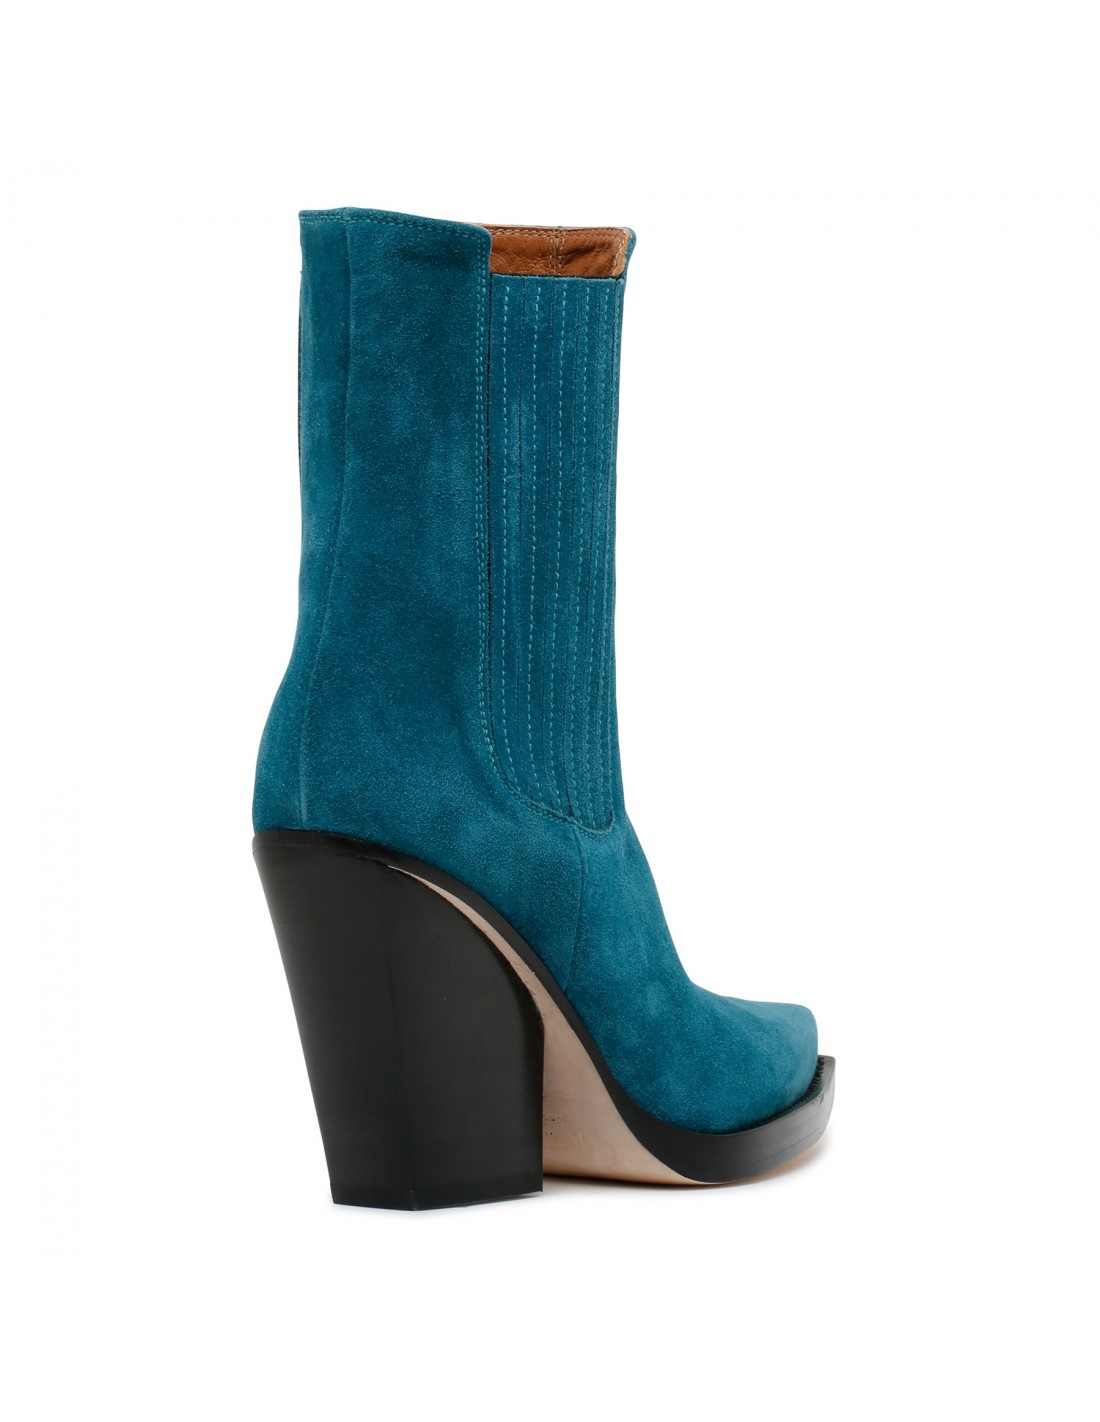 Dallas ankle boots